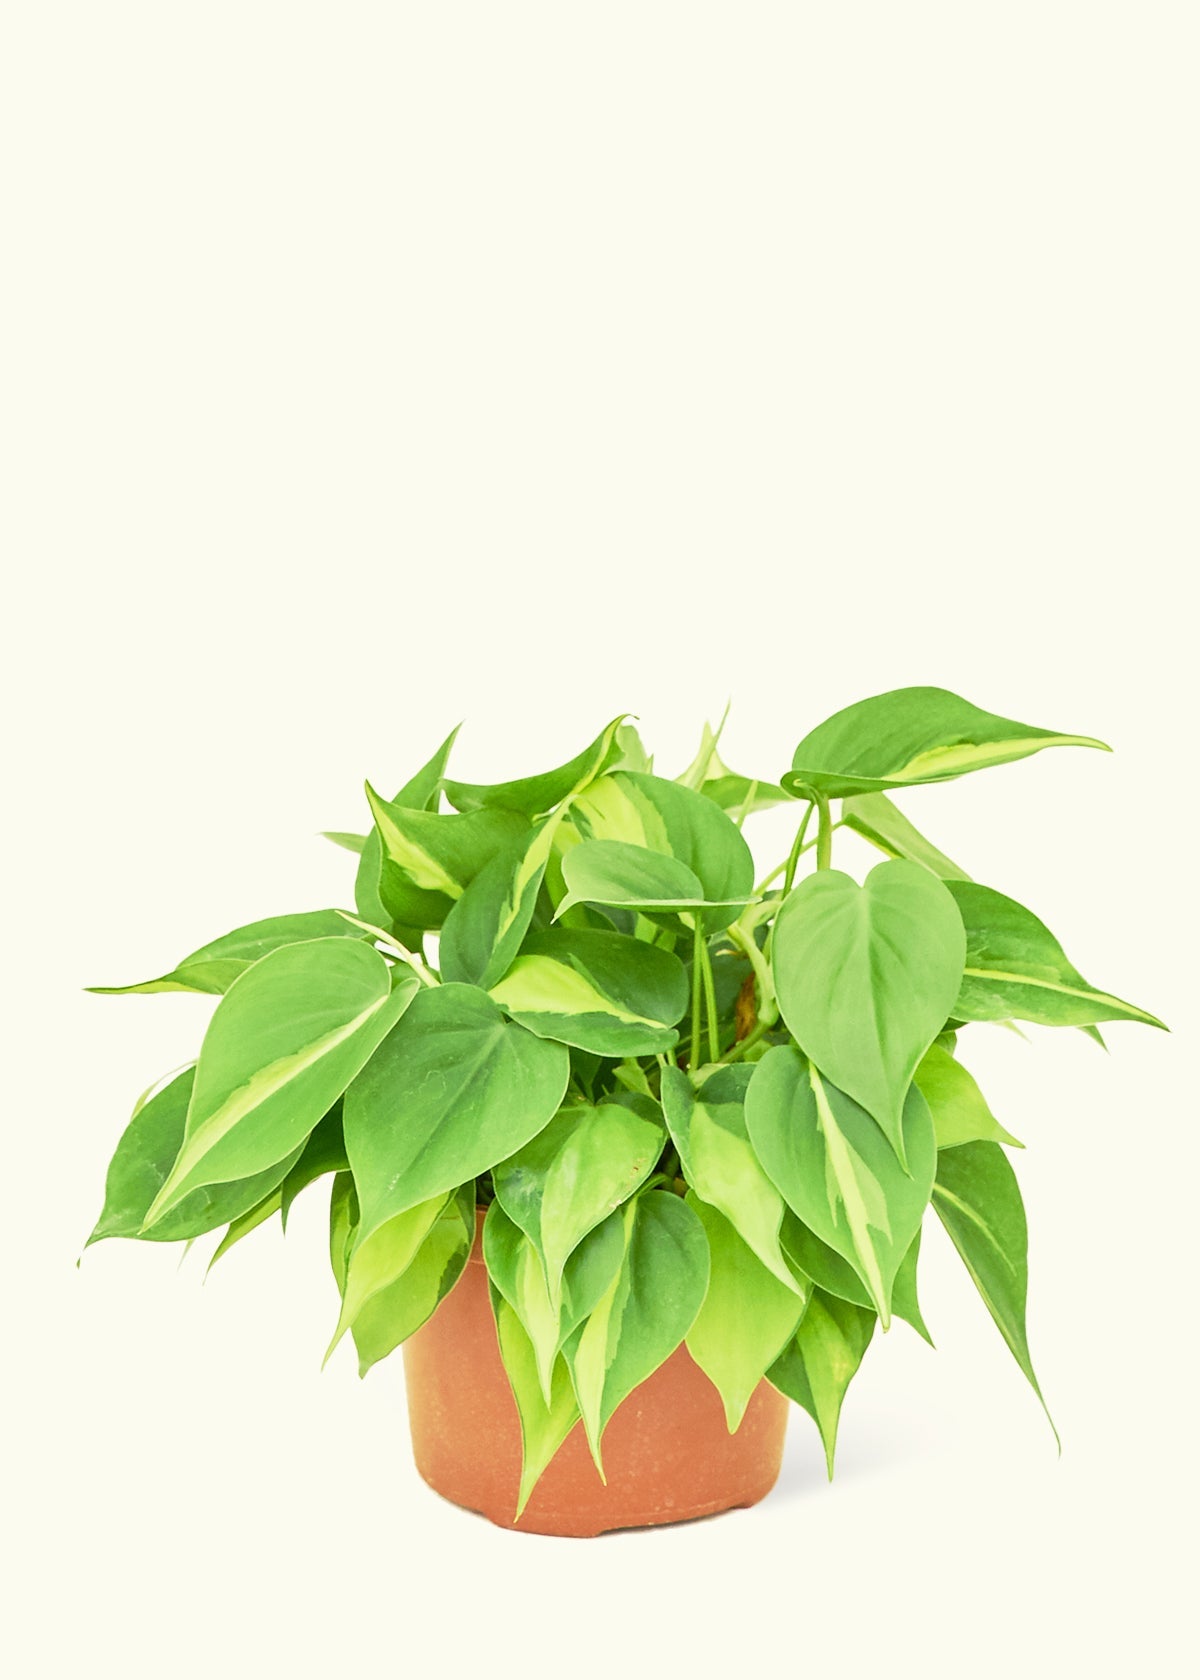 Medium Philodendron 'Brazil' (Philodendron hederaceum)